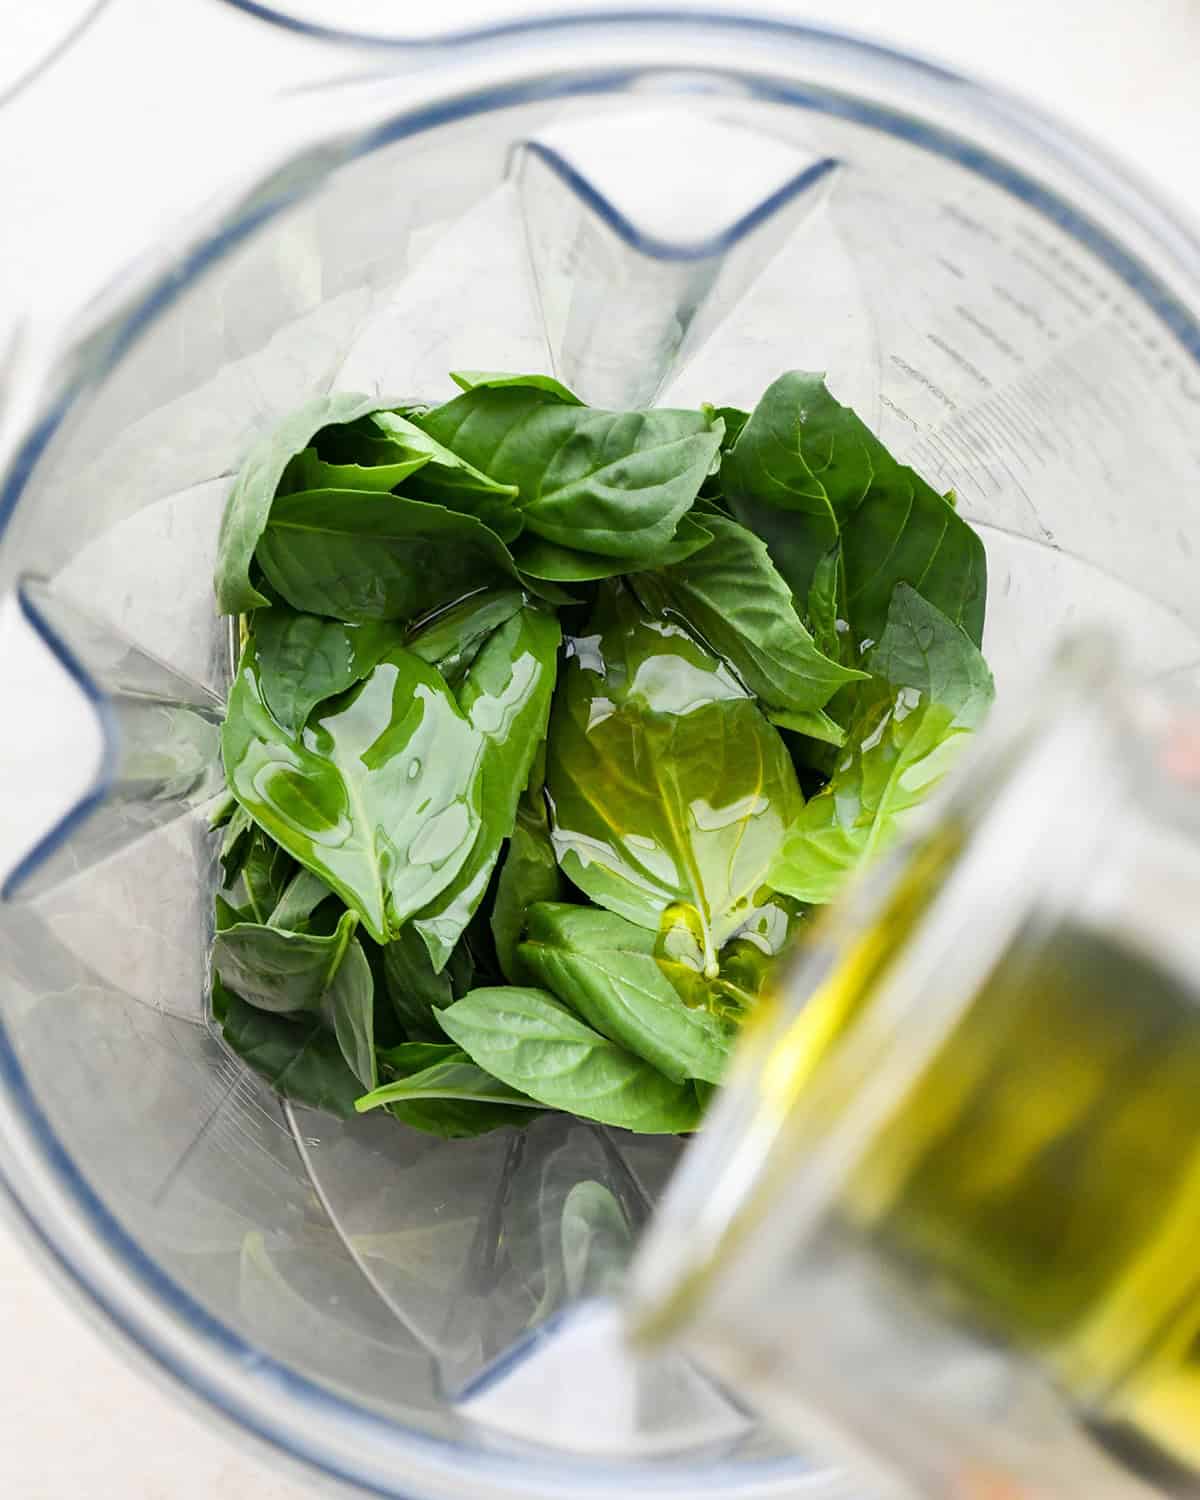 How to Make Pesto Sauce - olive oil being poured over basil leaves in a blending container